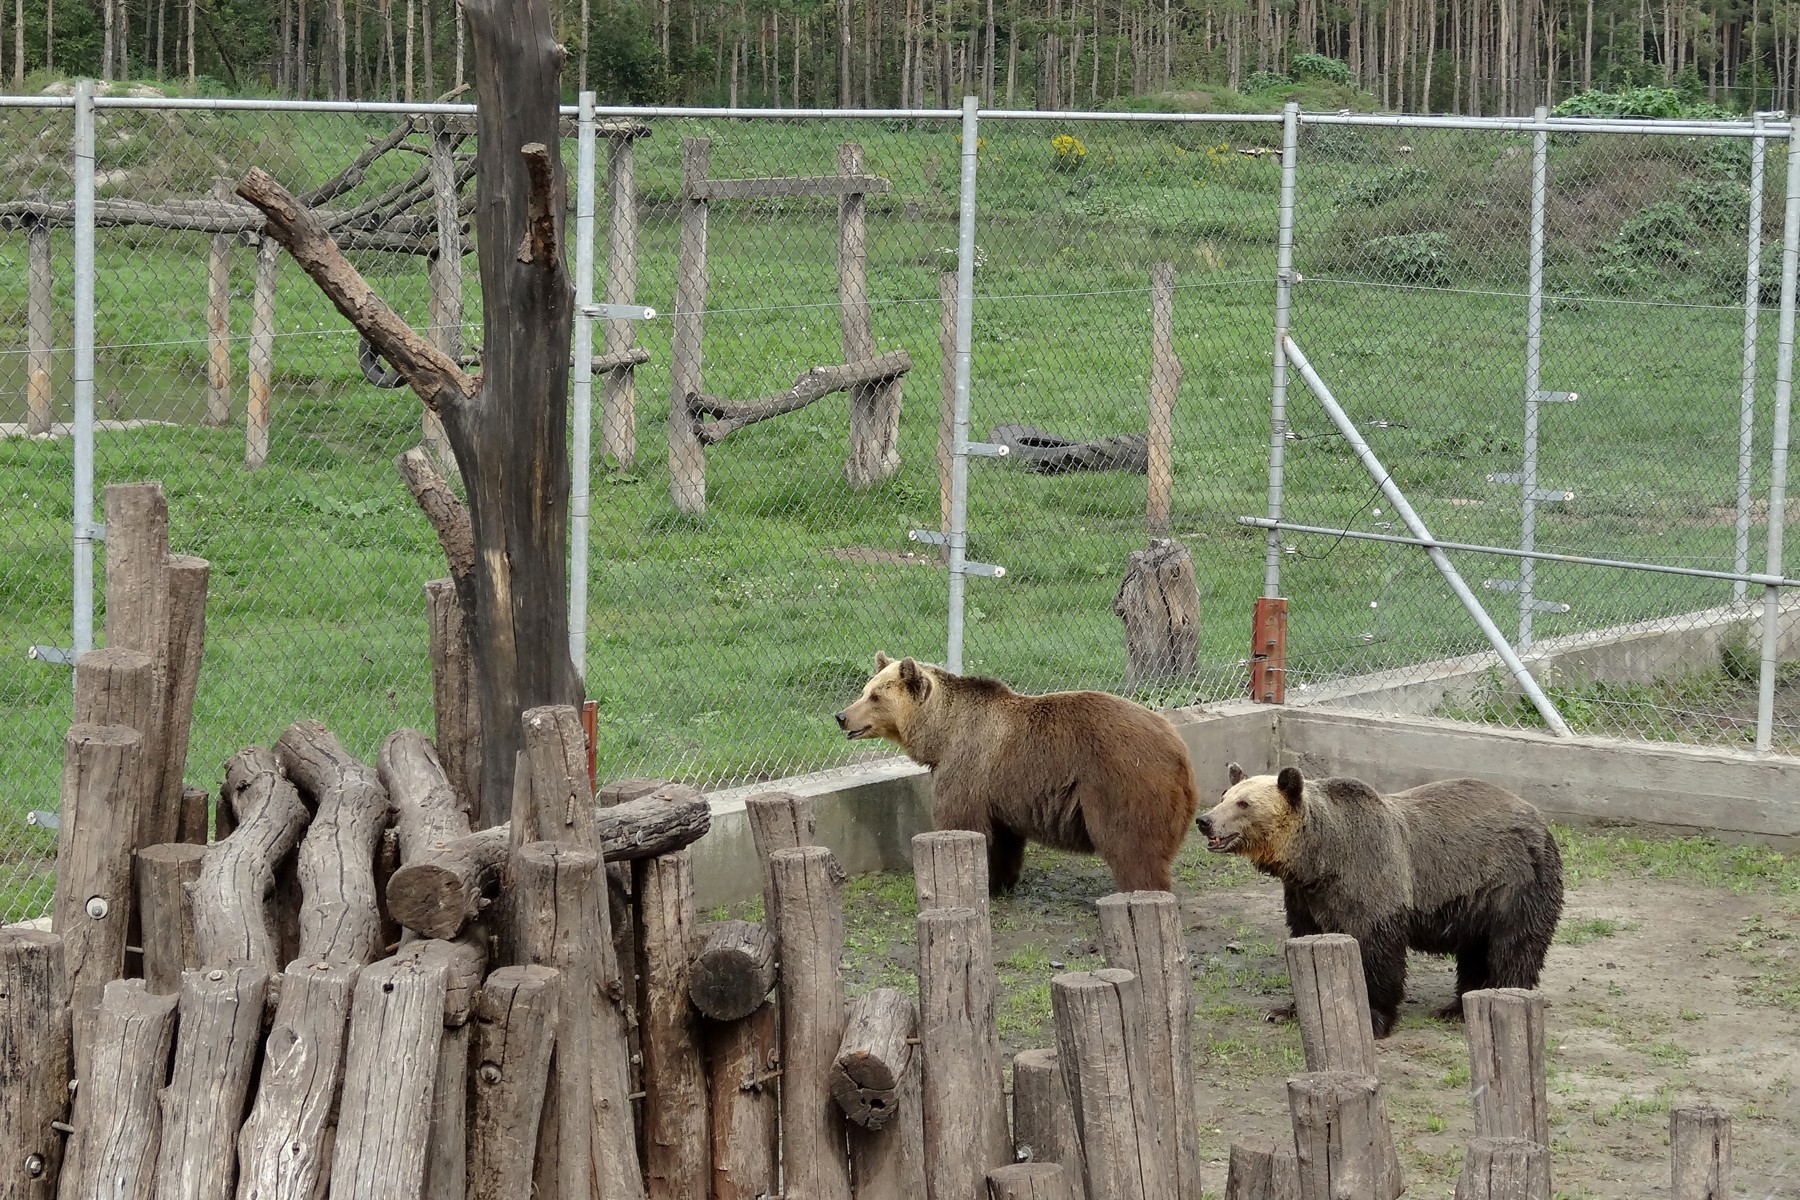 Two rescued bears in Hungarian bear sanctuary